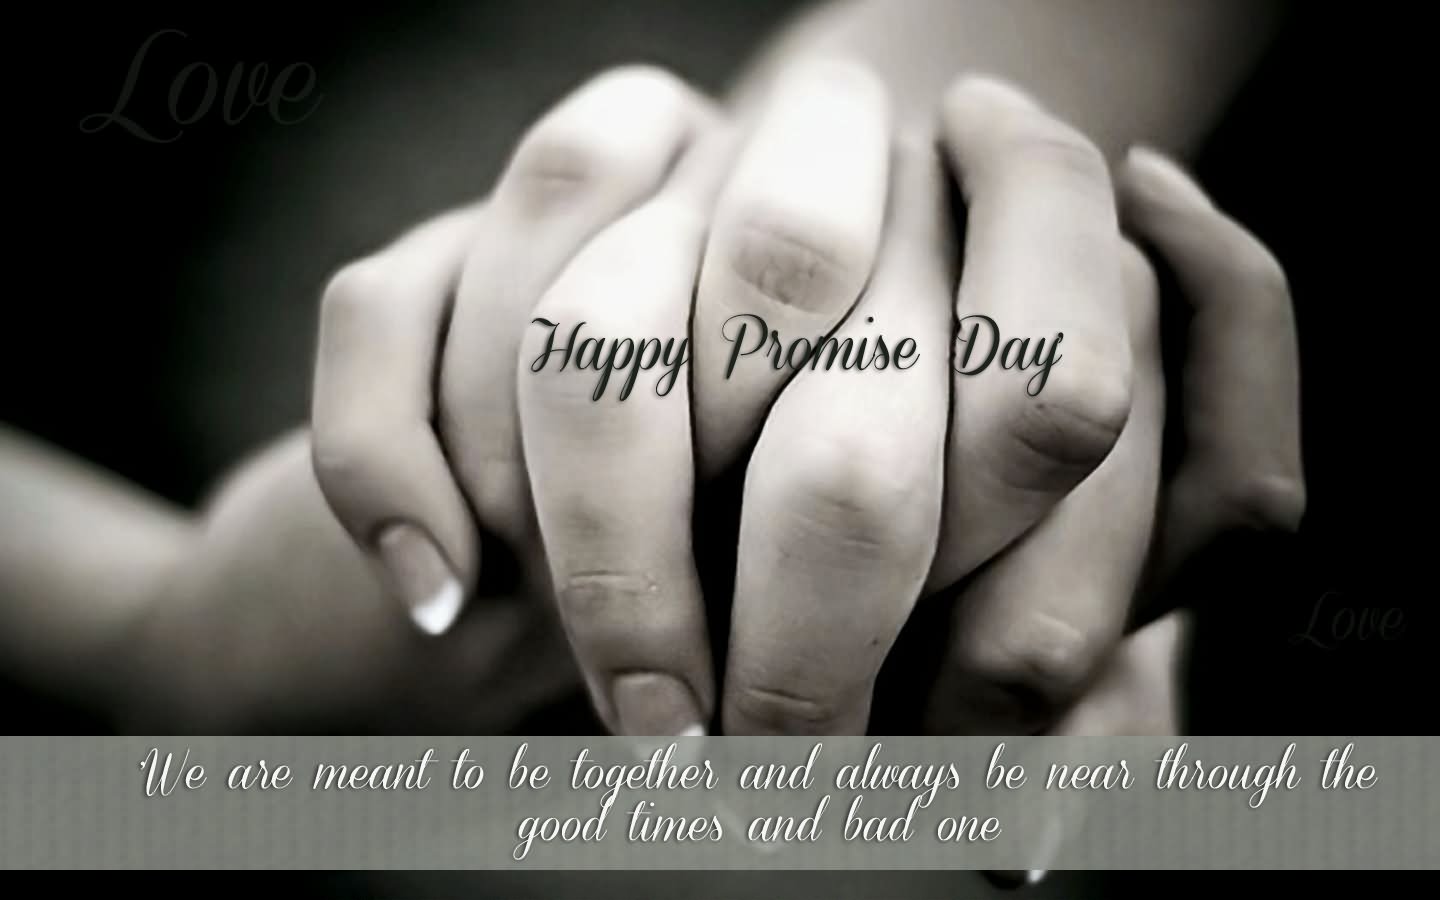 Happy Promise Day Wishes Wallpaper